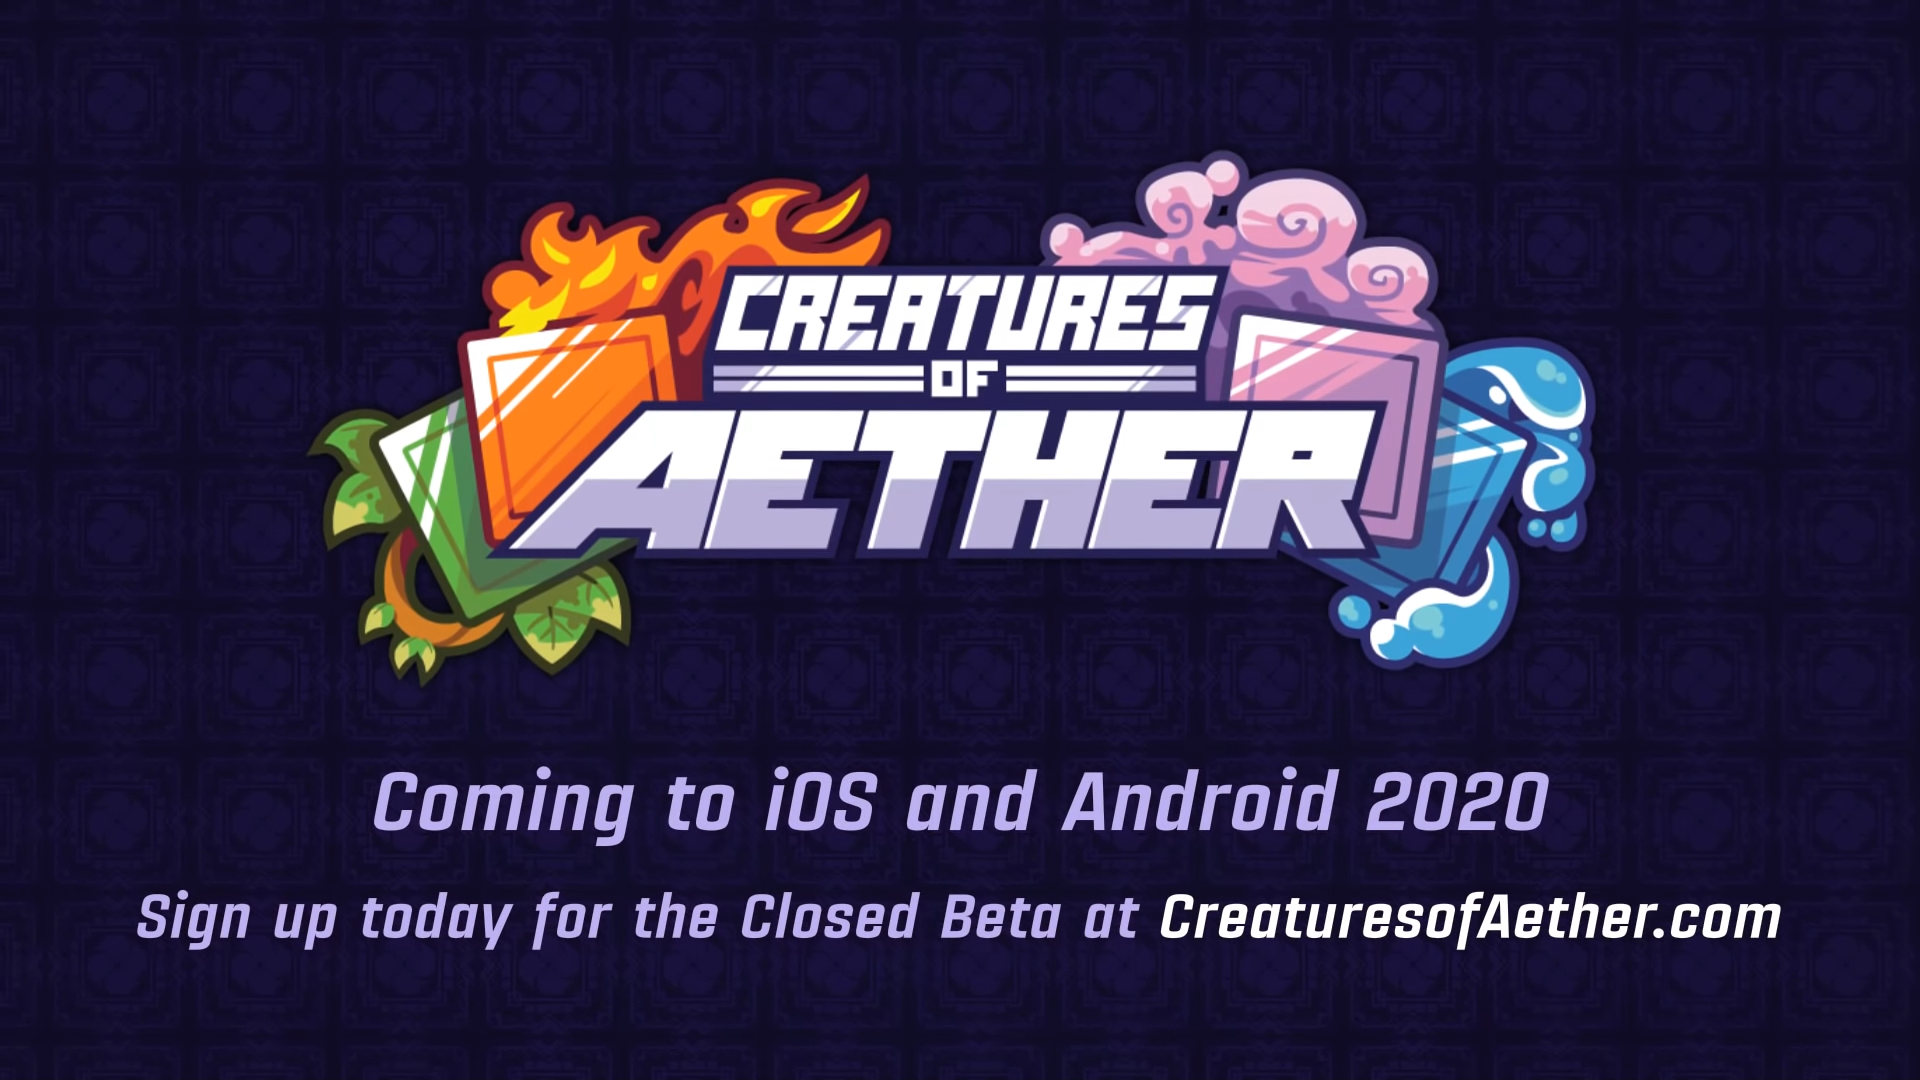 Creatures Of Aether が配信 ケモノ戦略ゲーム Iphoneteq